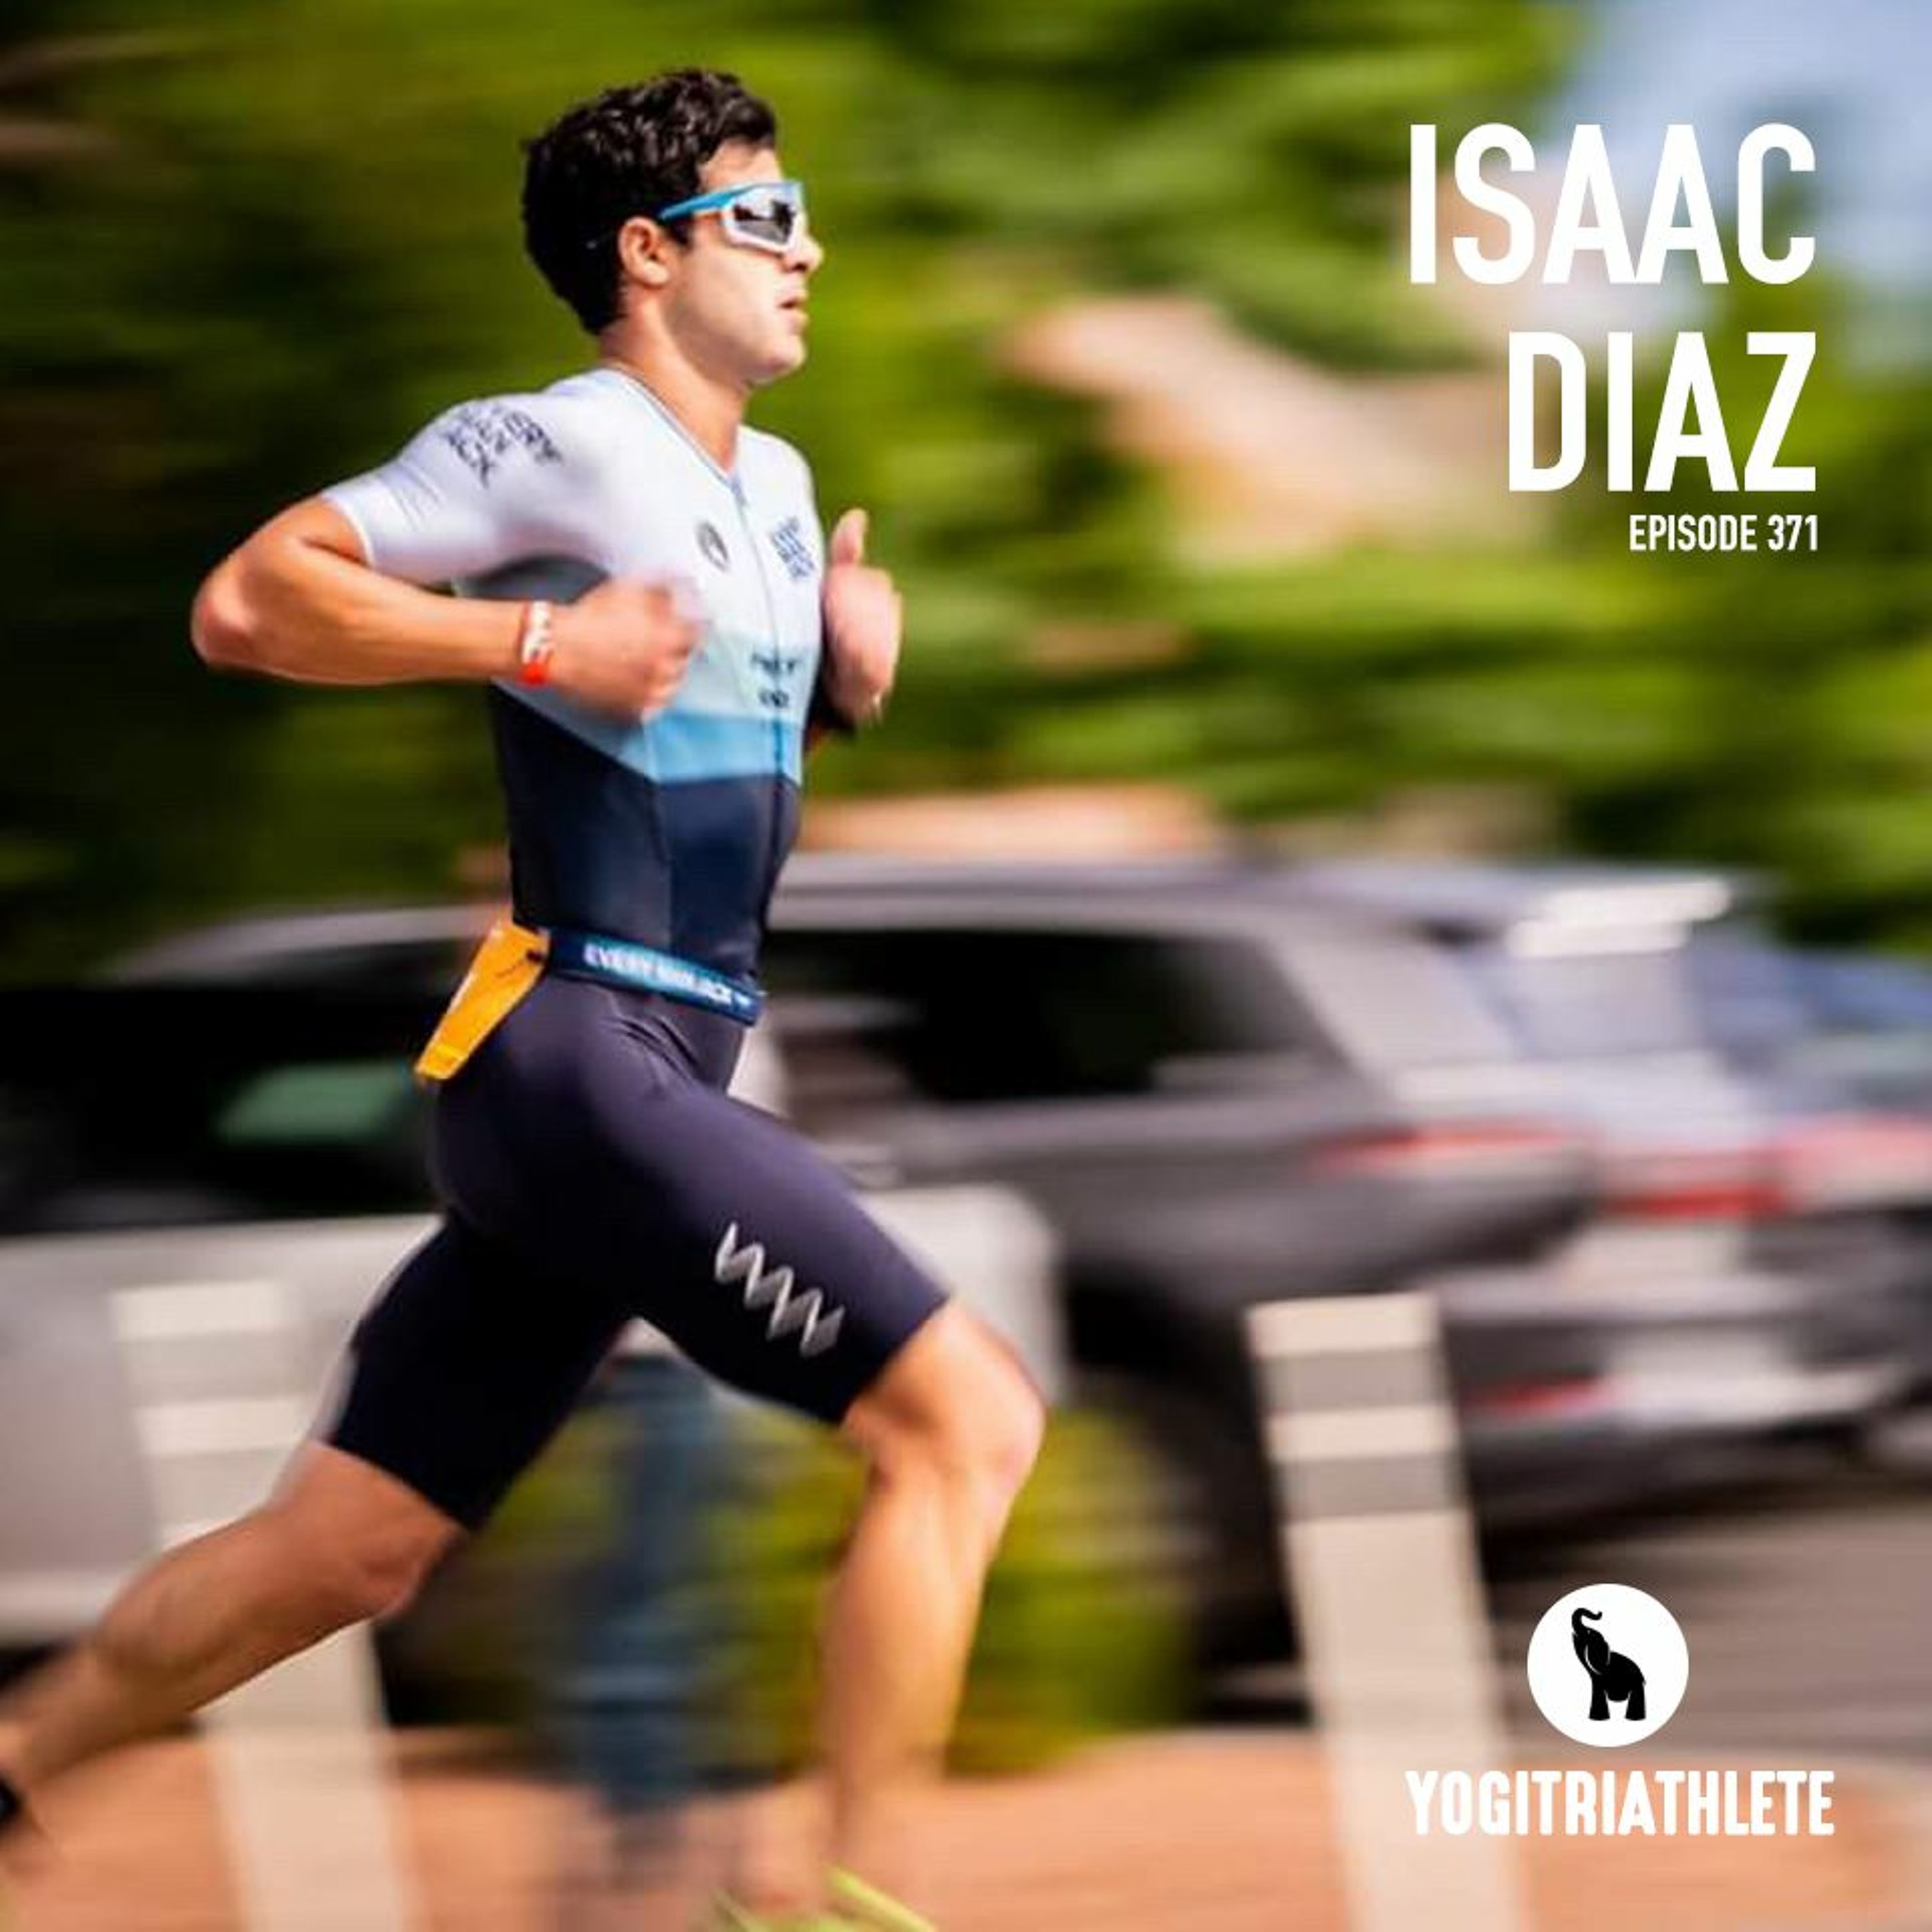 Isaac Diaz, Professional Triathlete On The Power Of Prana And Living Our Zone Of Genius.